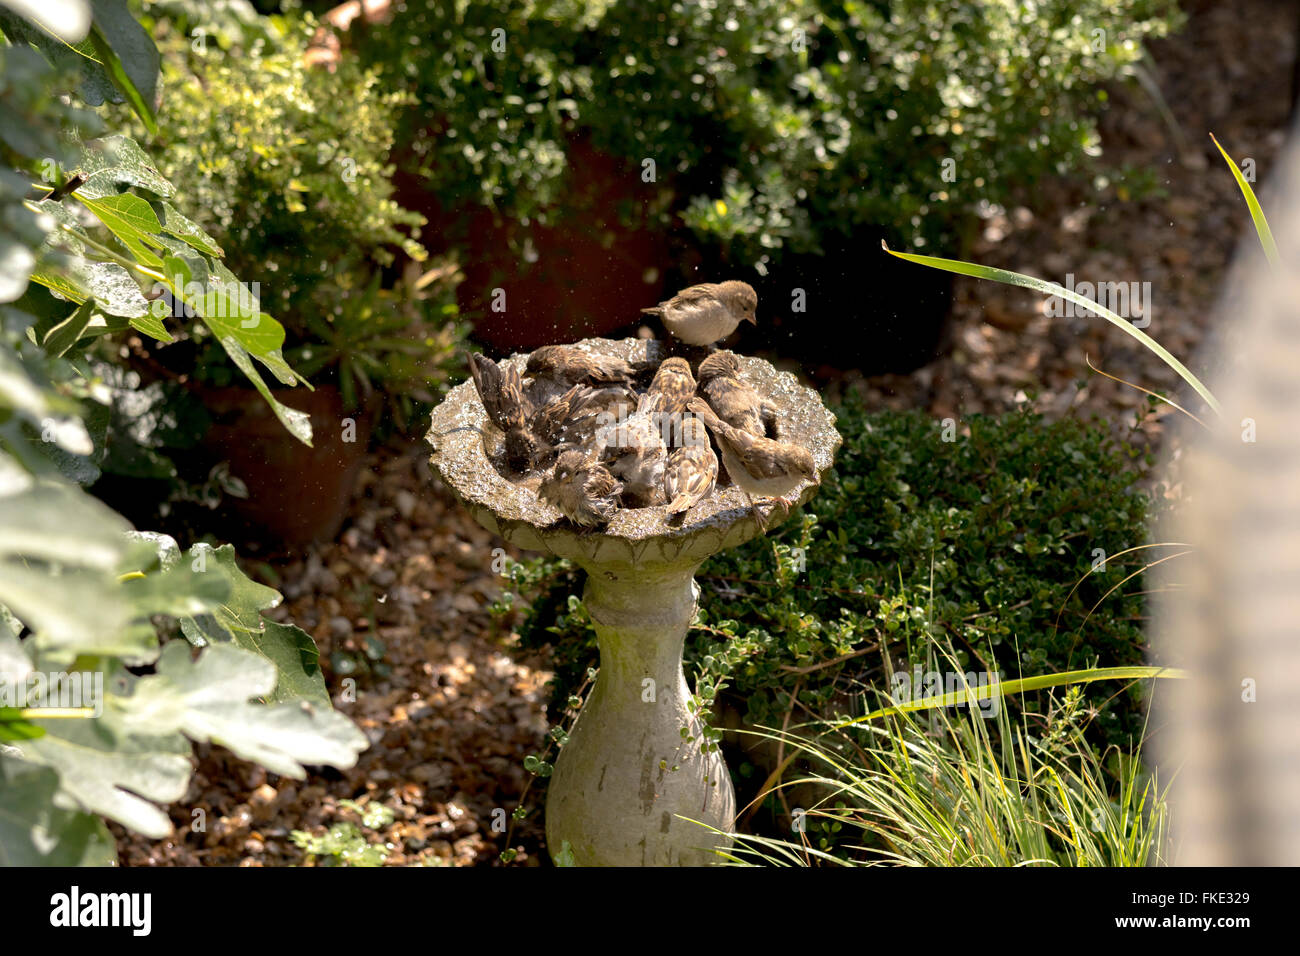 Crowded group of house sparrows (passer domesticus) bathing in stone bird bath in garden Stock Photo